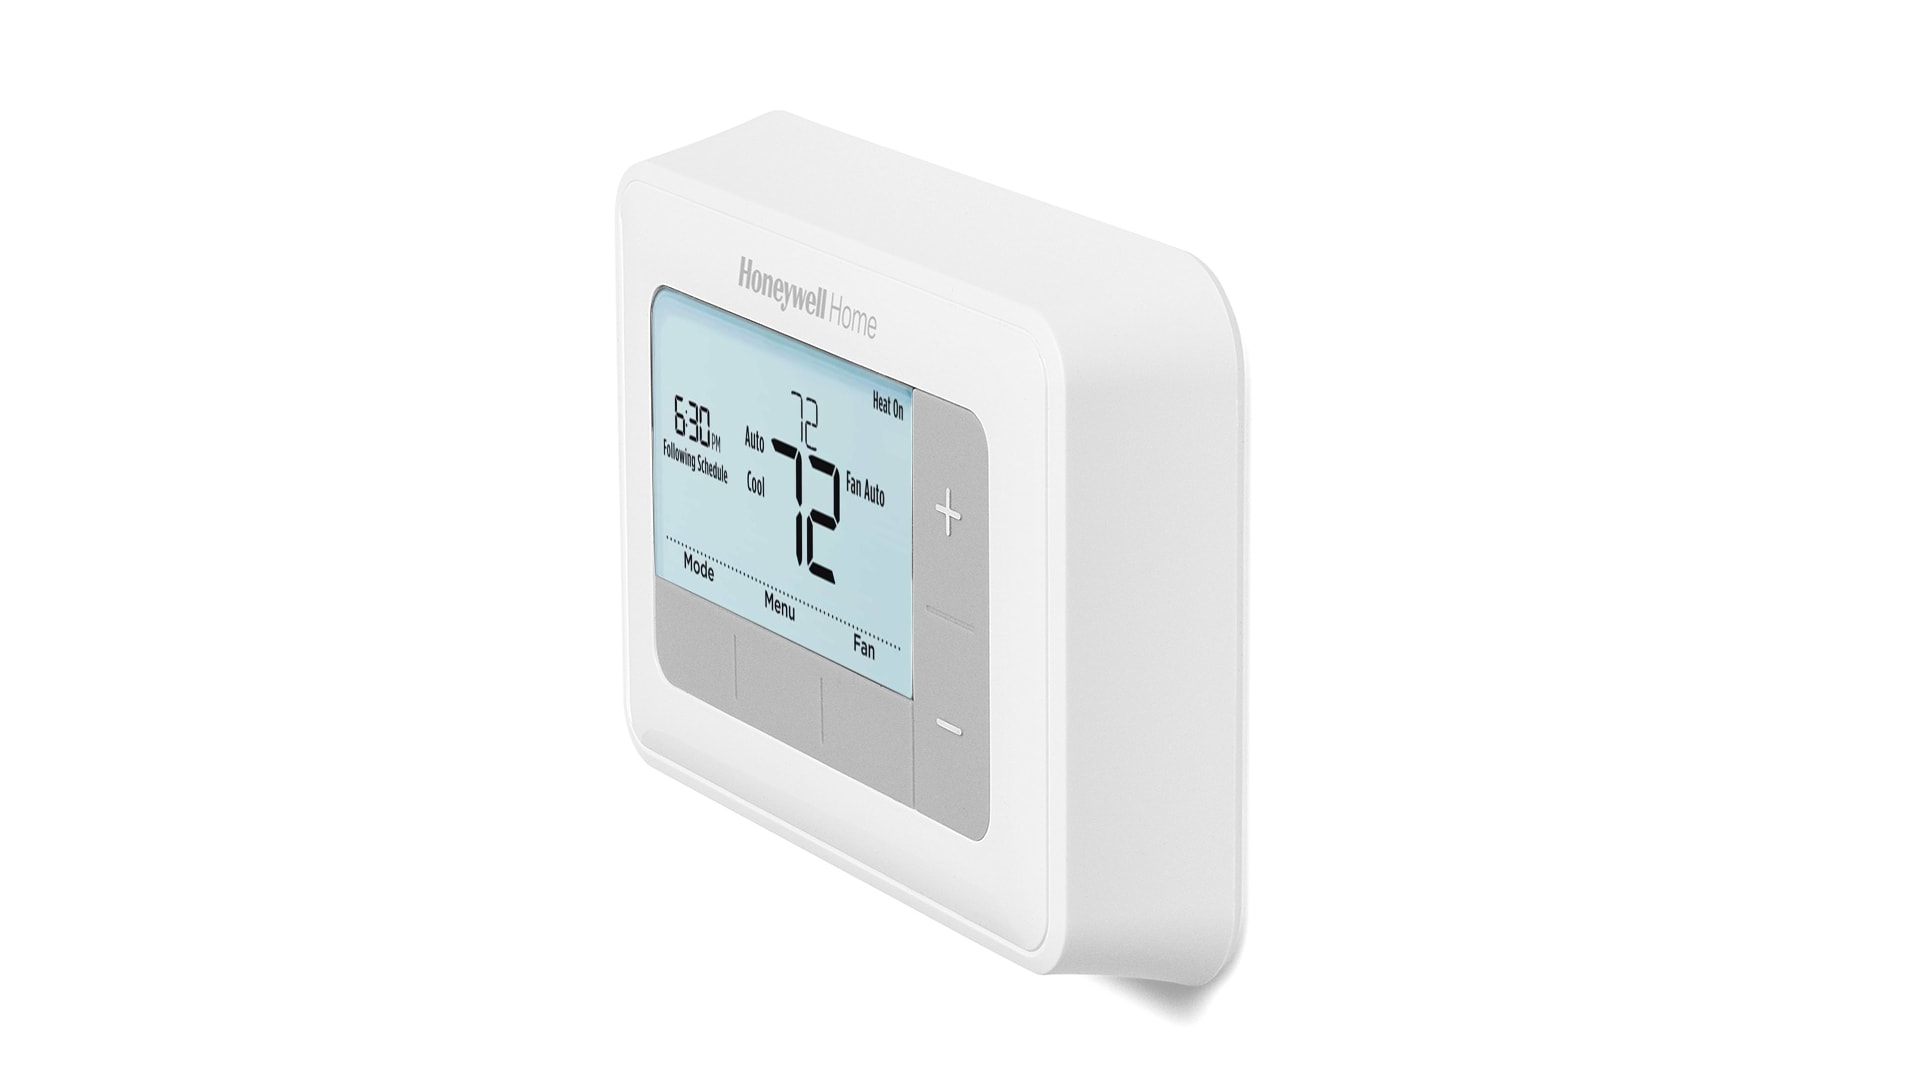 Honeywell Home RTH221B 24-Volt Basic Schedule Programmable Thermostat